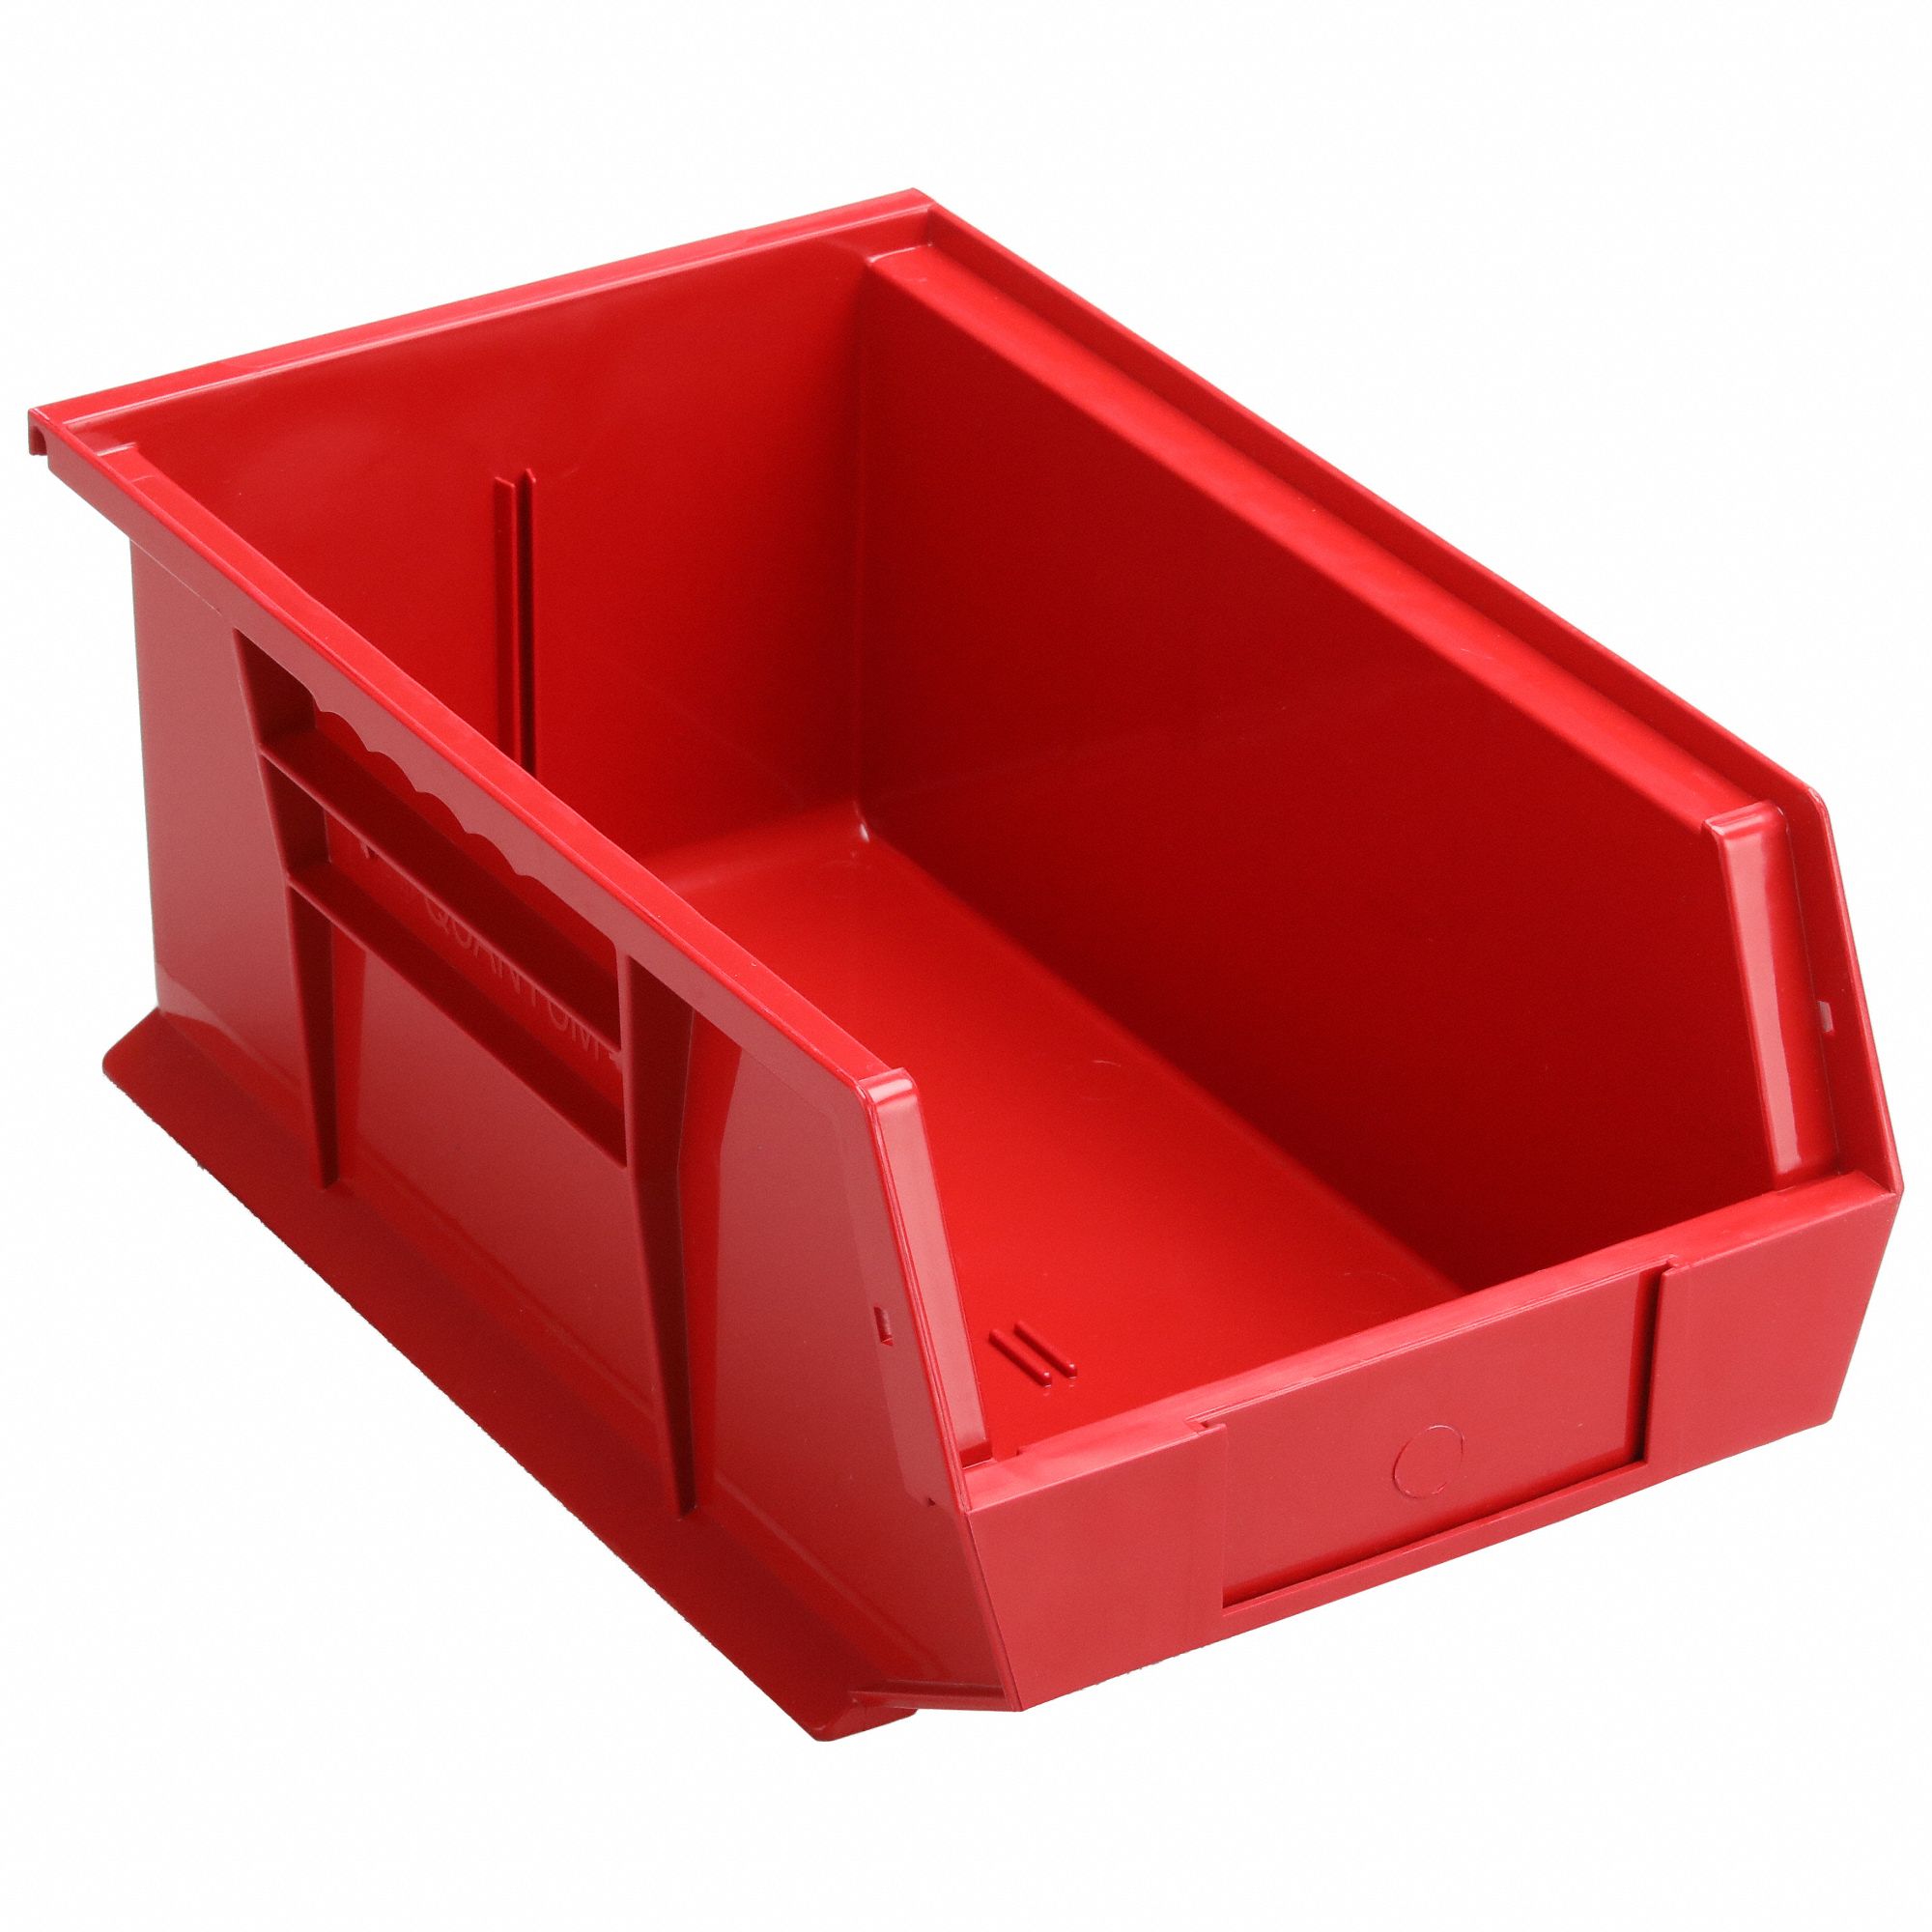 QUANTUM STORAGE SYSTEMS Hang and Stack Bin: 8 1/4 in x 13 5/8 in x 6 in,  Red, Label Holders